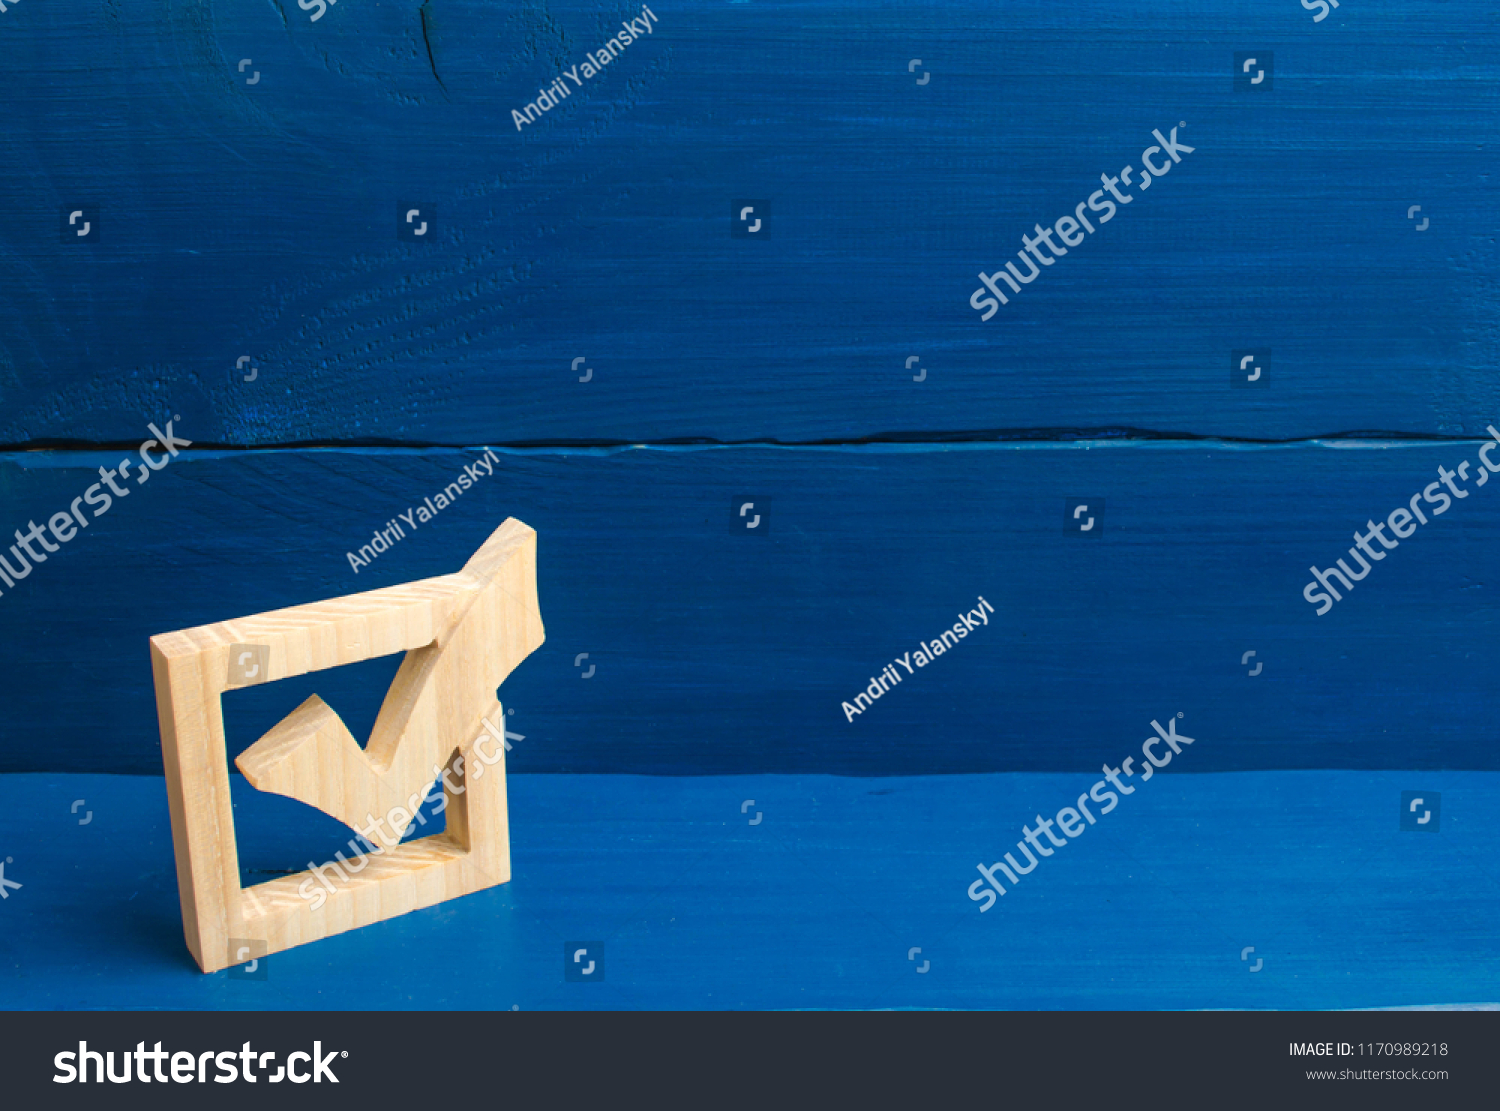 Election of the President or Government. Democracy, development, civil initiative. A wooden checkmark in the box on a blue background. The concept of suffrage, voting in elections. #1170989218